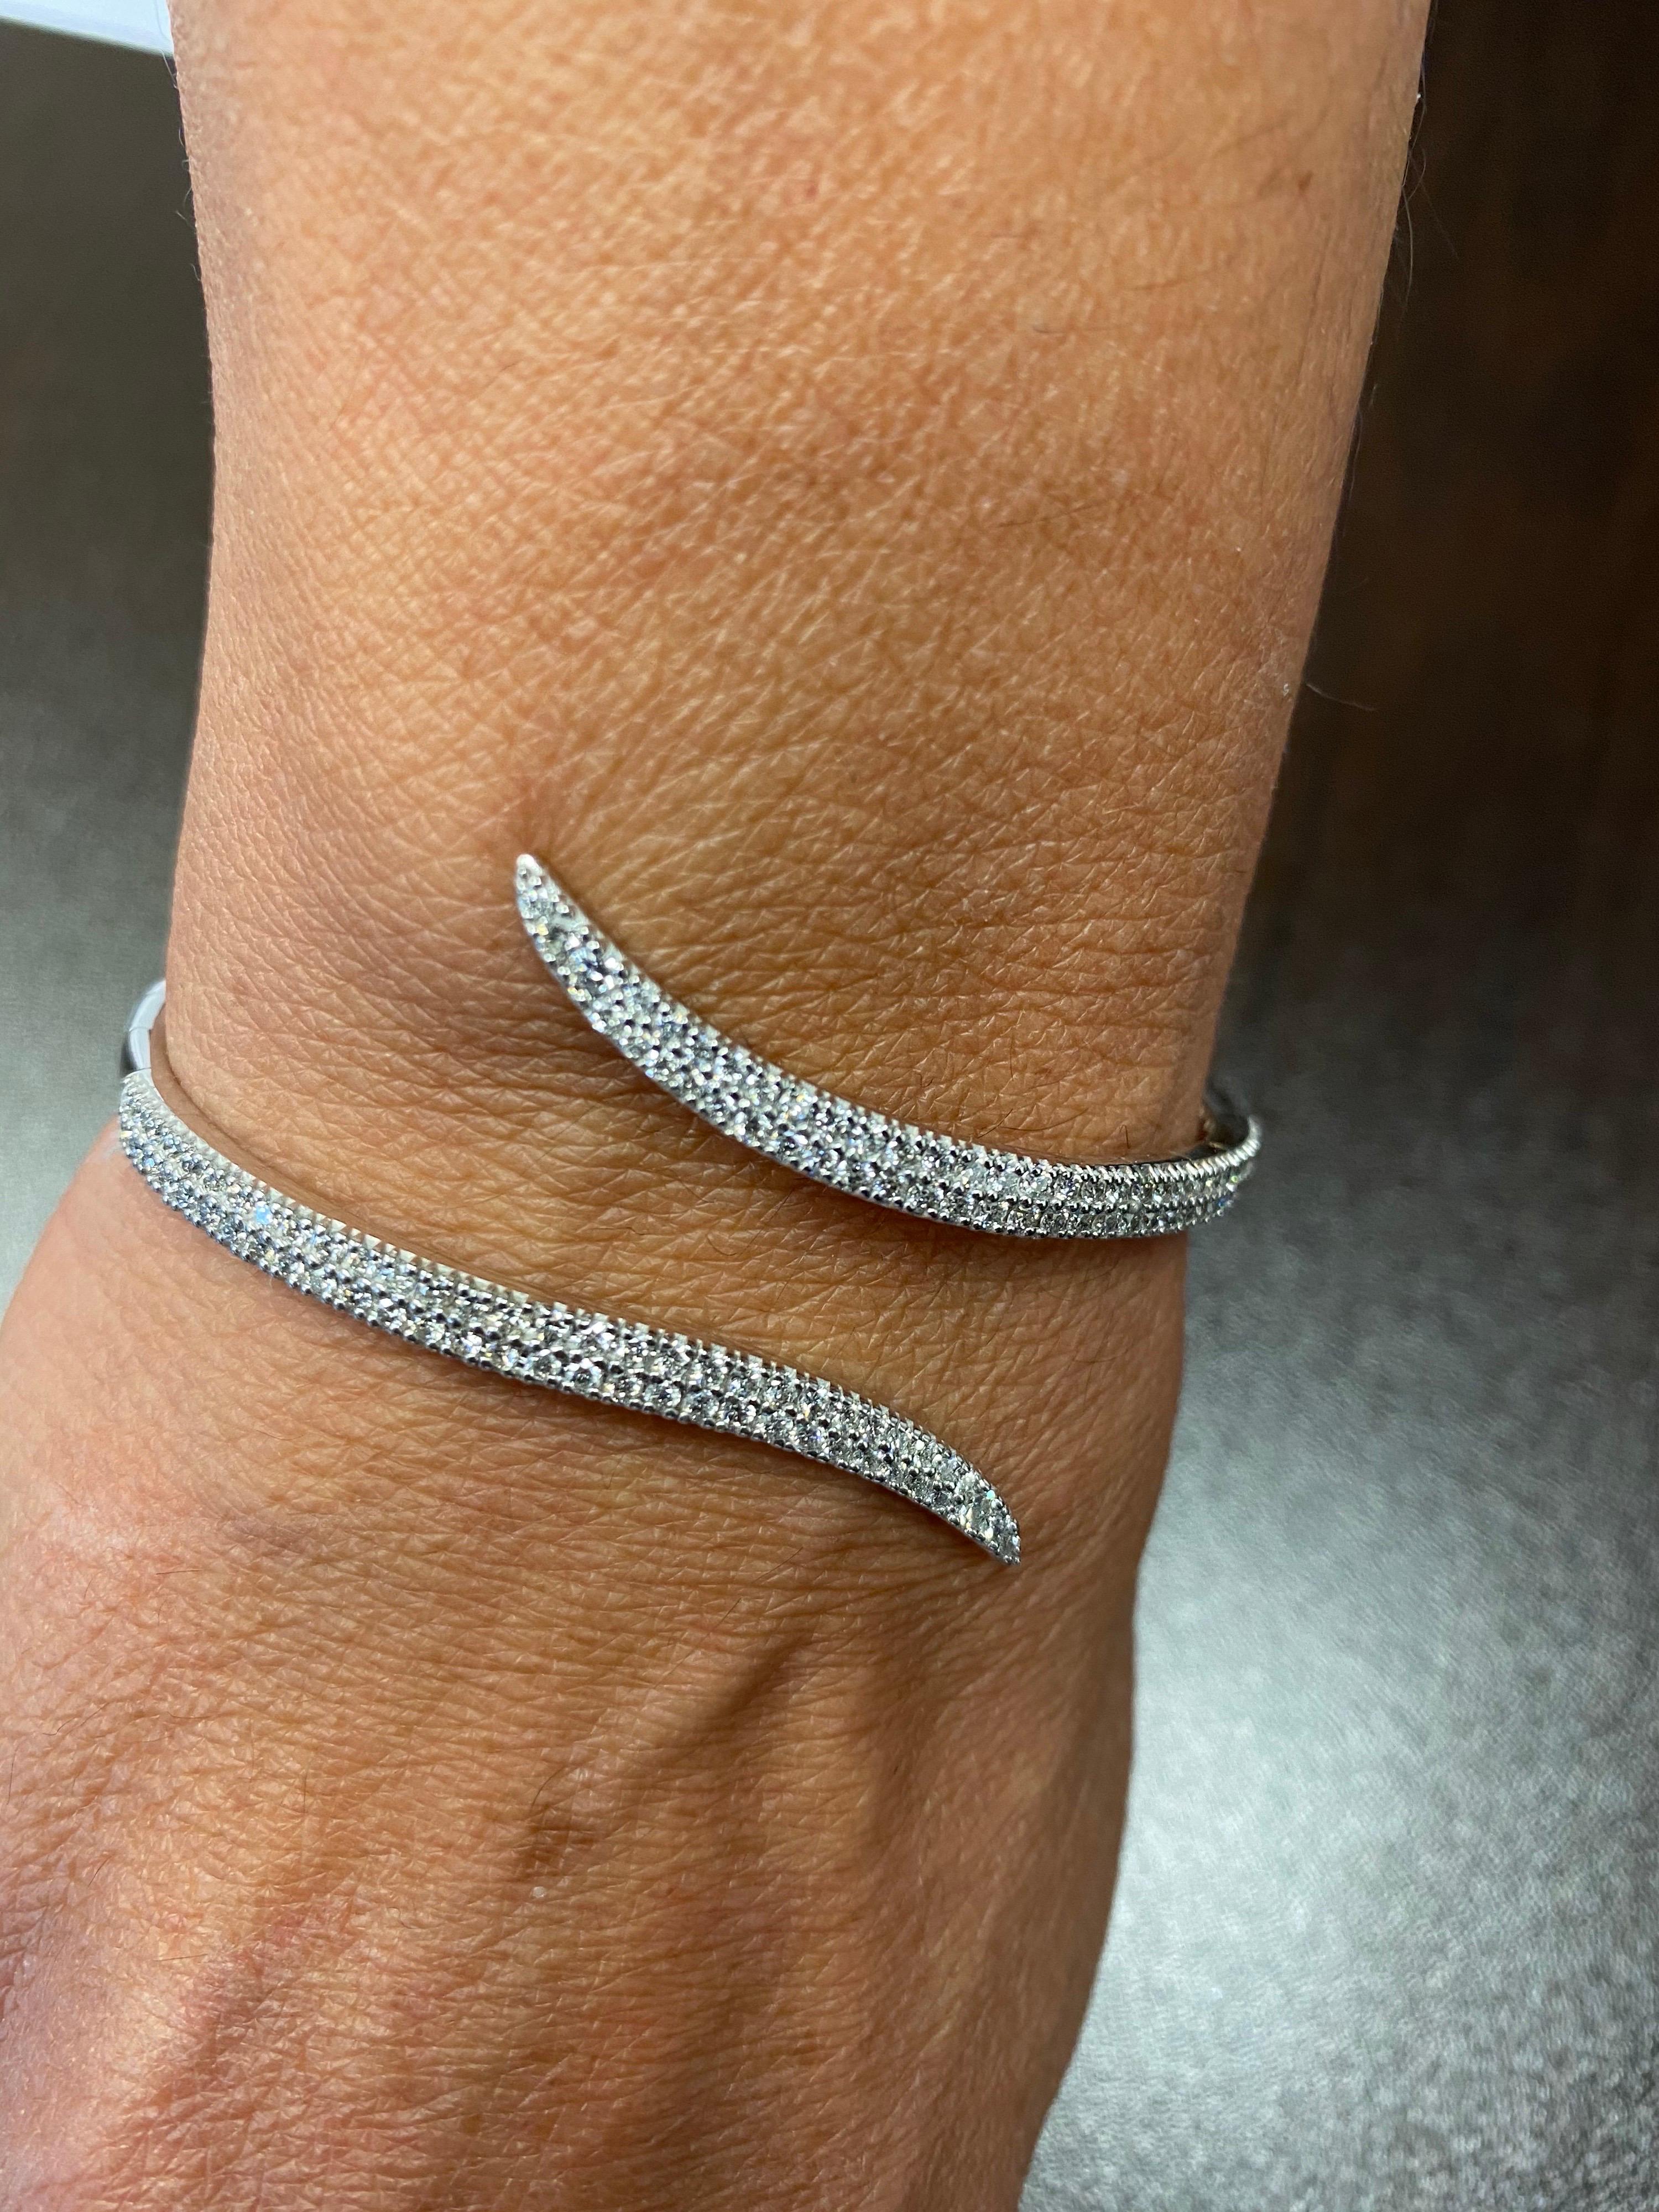 Diamond bangle set in 14K white gold. This italian made piece is set with 2 pointer diamonds, making the total weight 2.05 carats. The color of the stones are G, the clarity is SI1-SI2.